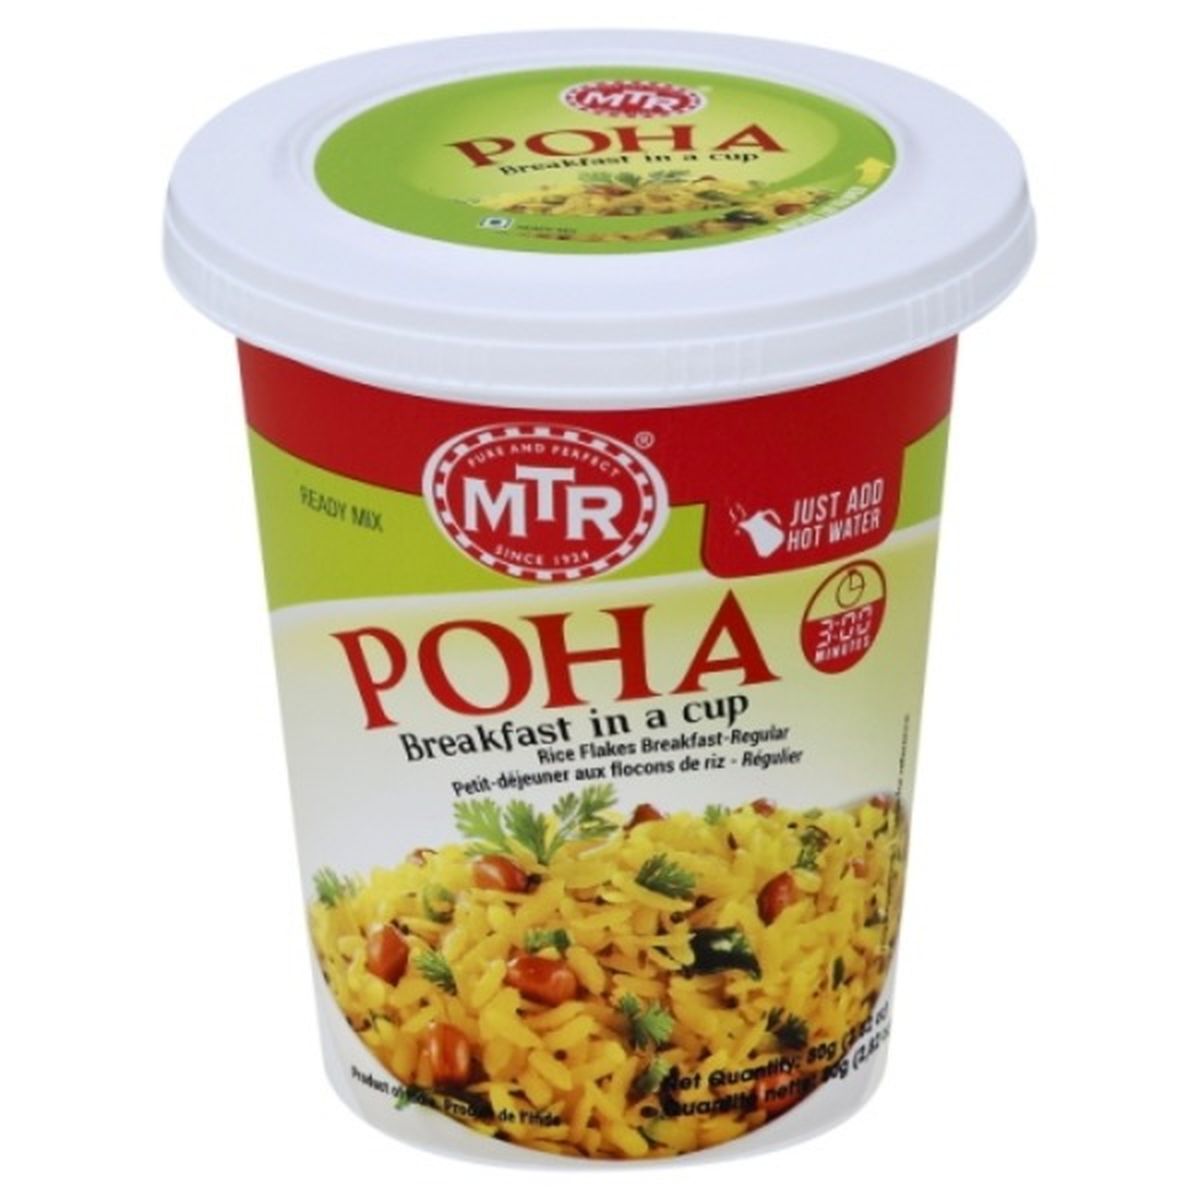 Calories in MTR Breakfast in a Cup, Poha